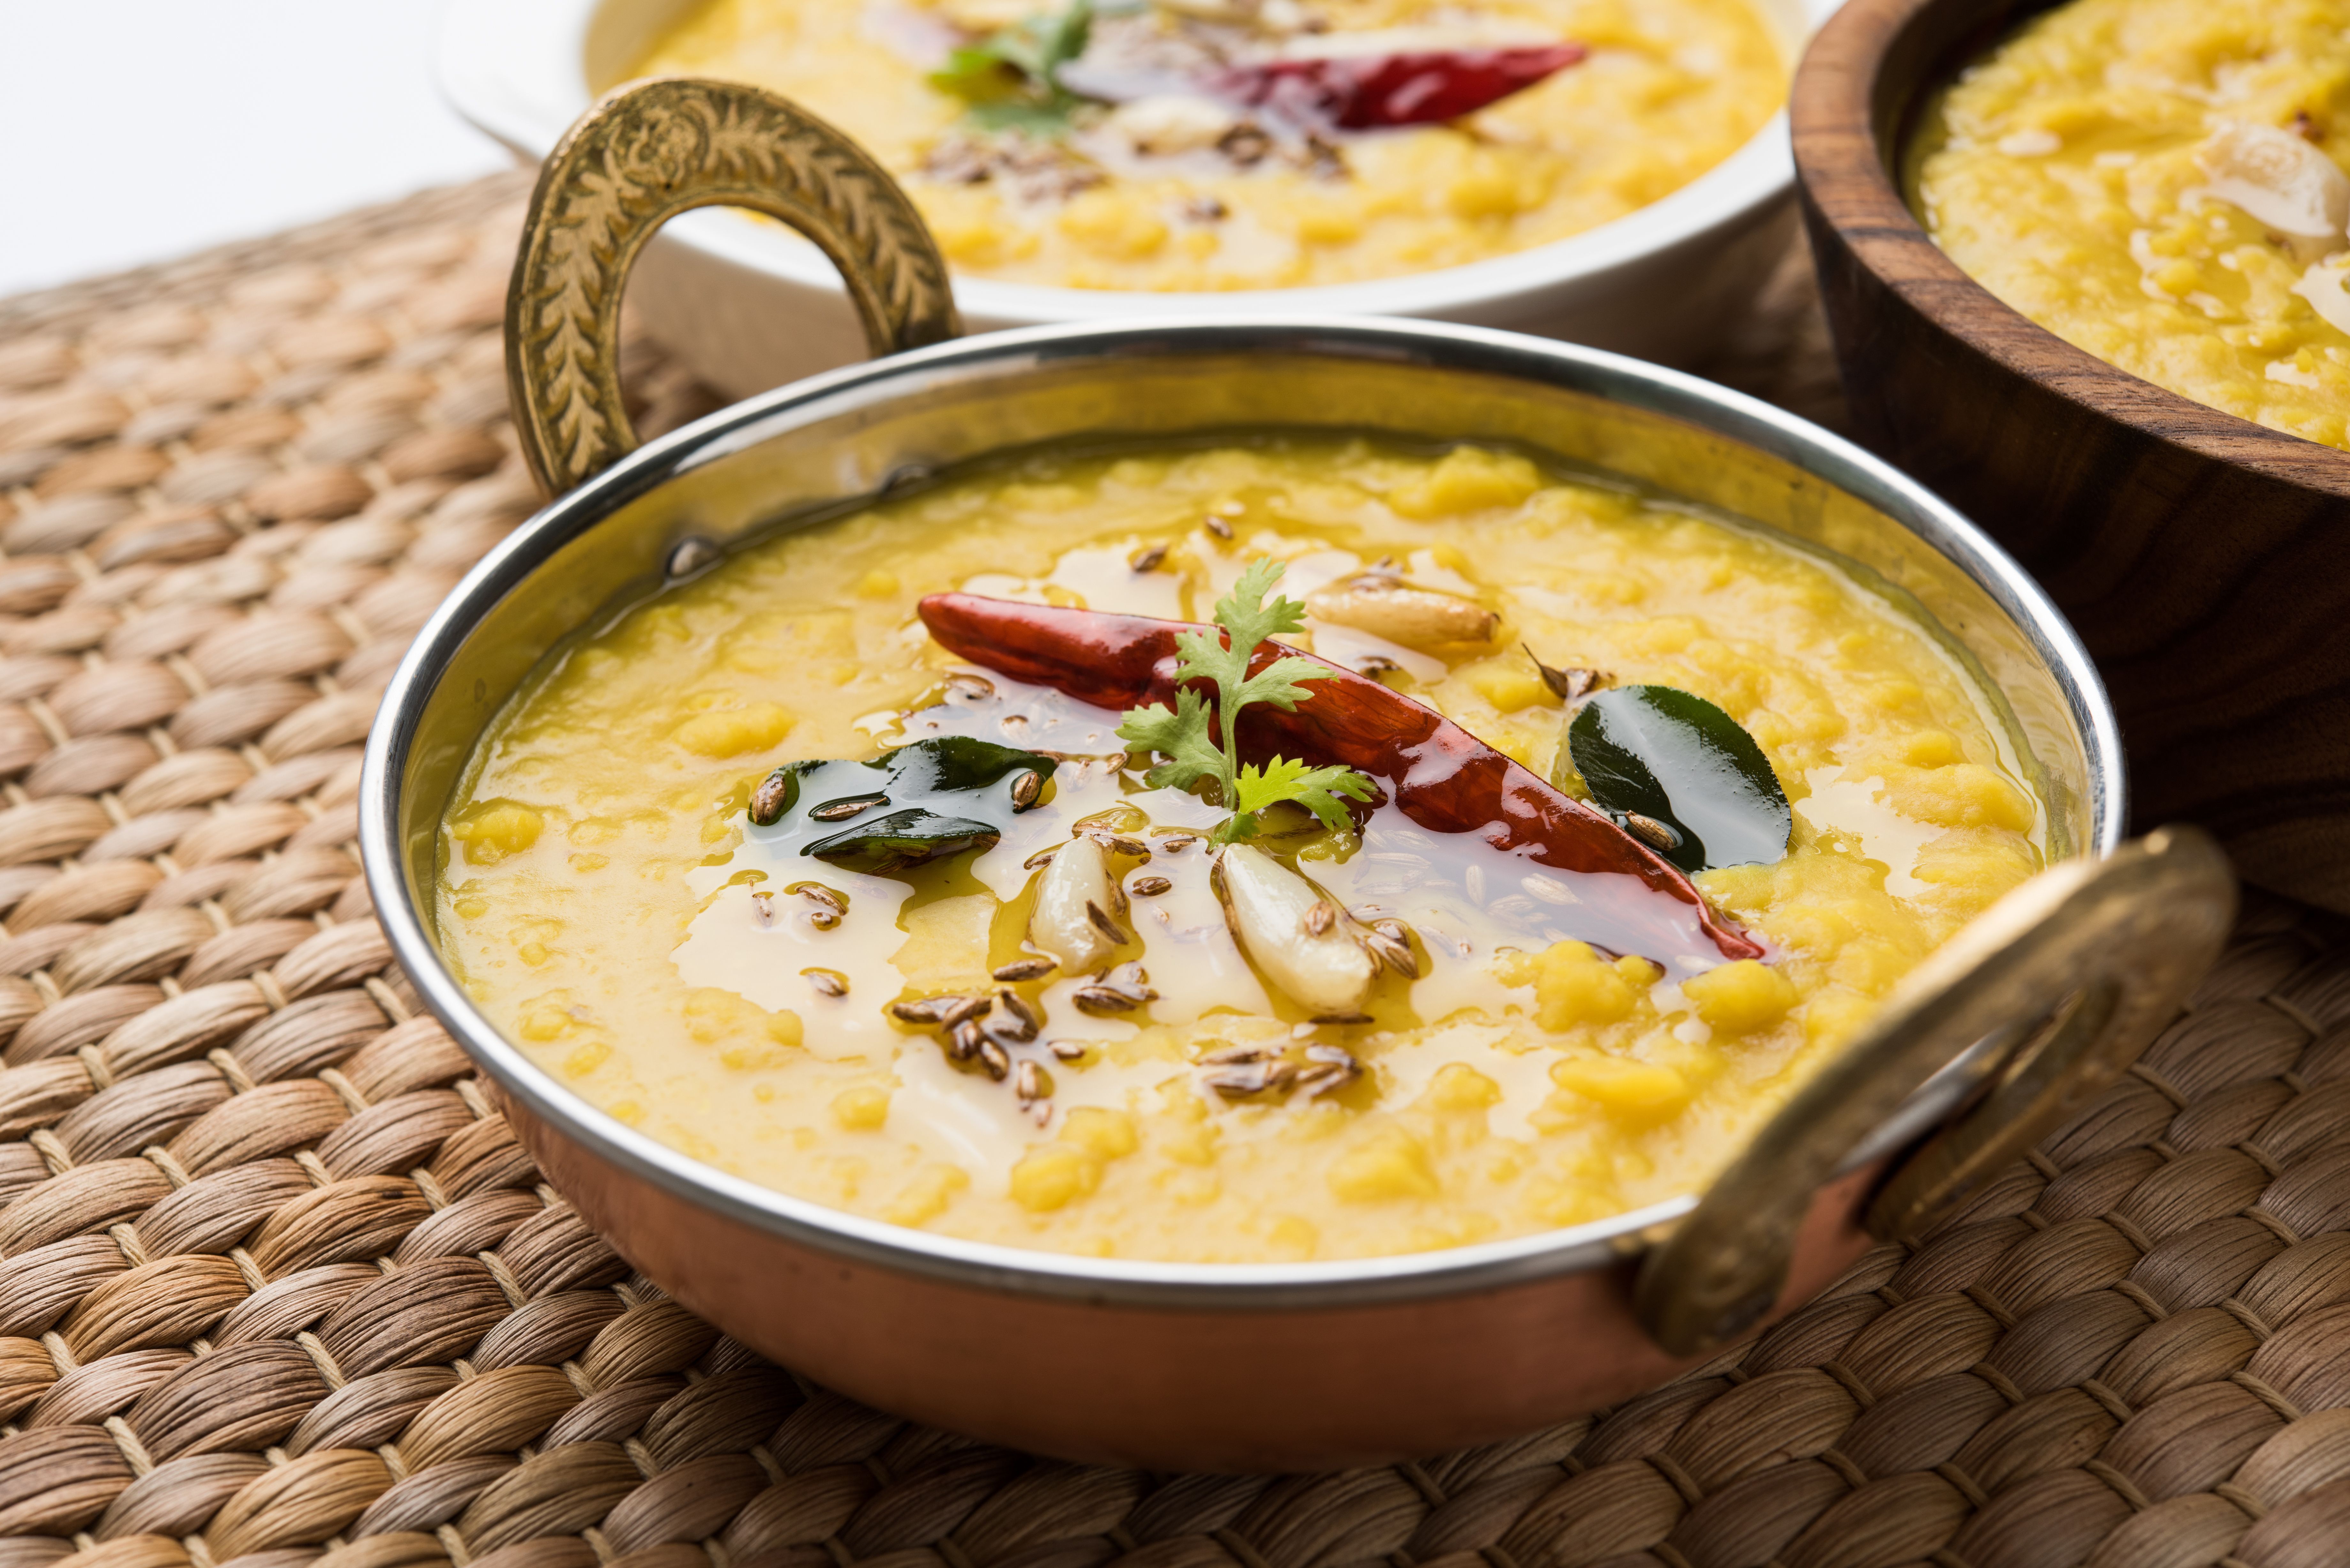 dal soup from india